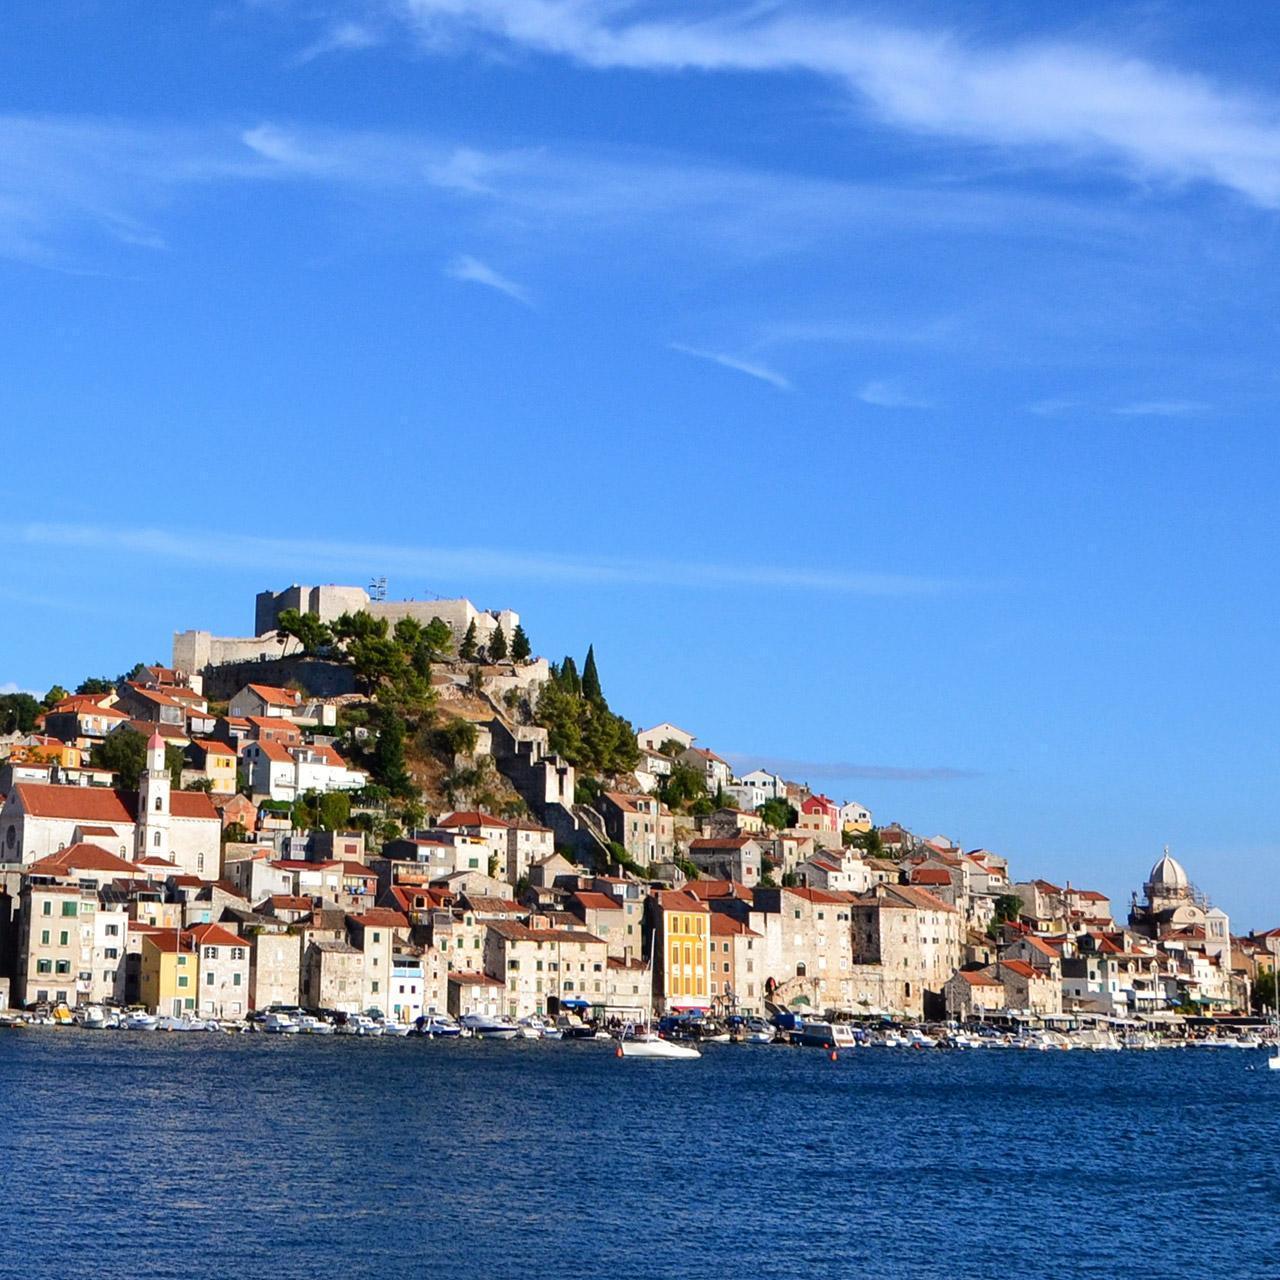 Sea view of the Trogir town with Blue Shark private tour